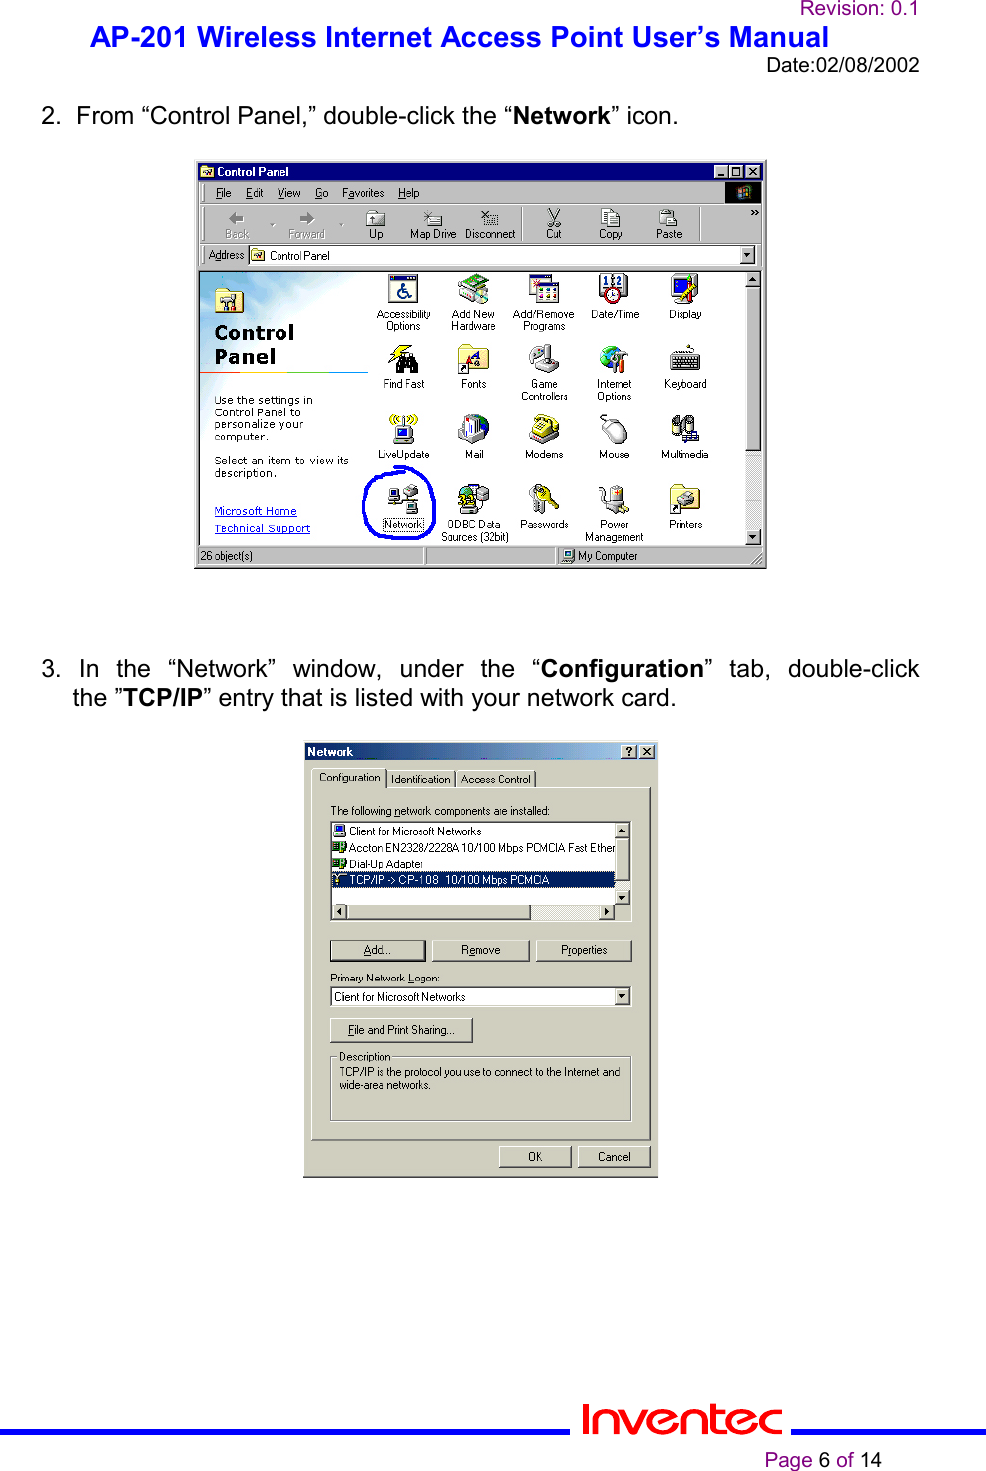 Revision: 0.1AP-201 Wireless Internet Access Point User’s ManualDate:02/08/2002                                                                                                                                                    Page 6 of 142.  From “Control Panel,” double-click the “Network” icon.3. In the “Network” window, under the “Configuration” tab, double-clickthe ”TCP/IP” entry that is listed with your network card.